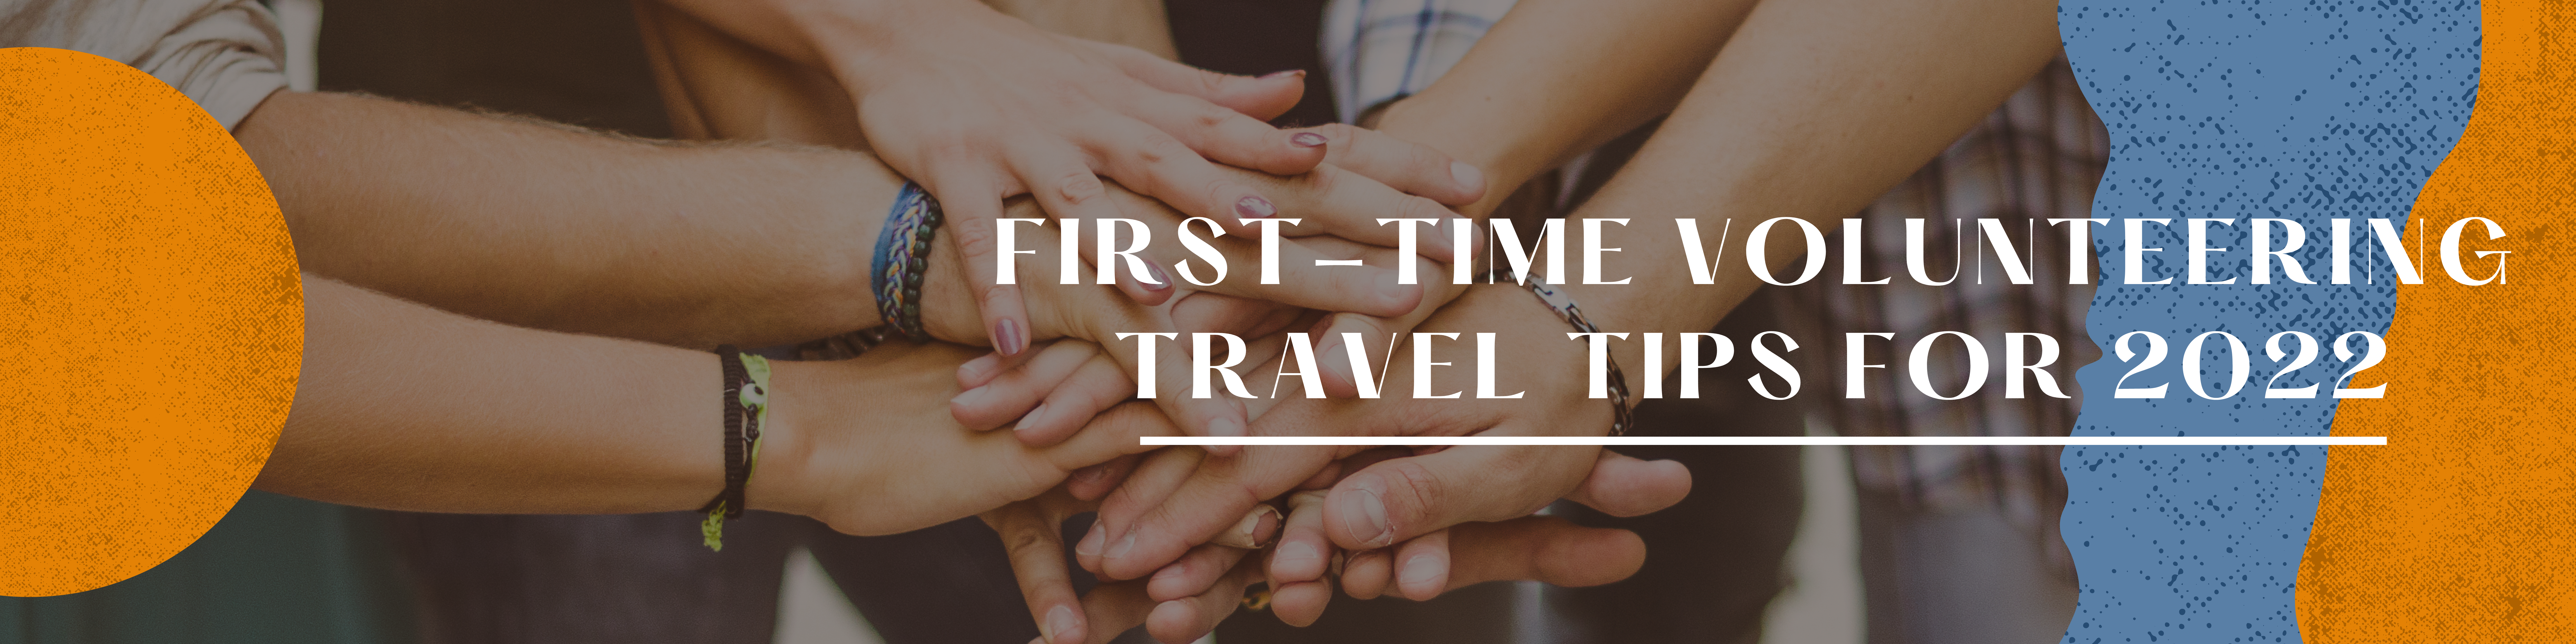 First-Time Volunteering Travel Tips For 2022